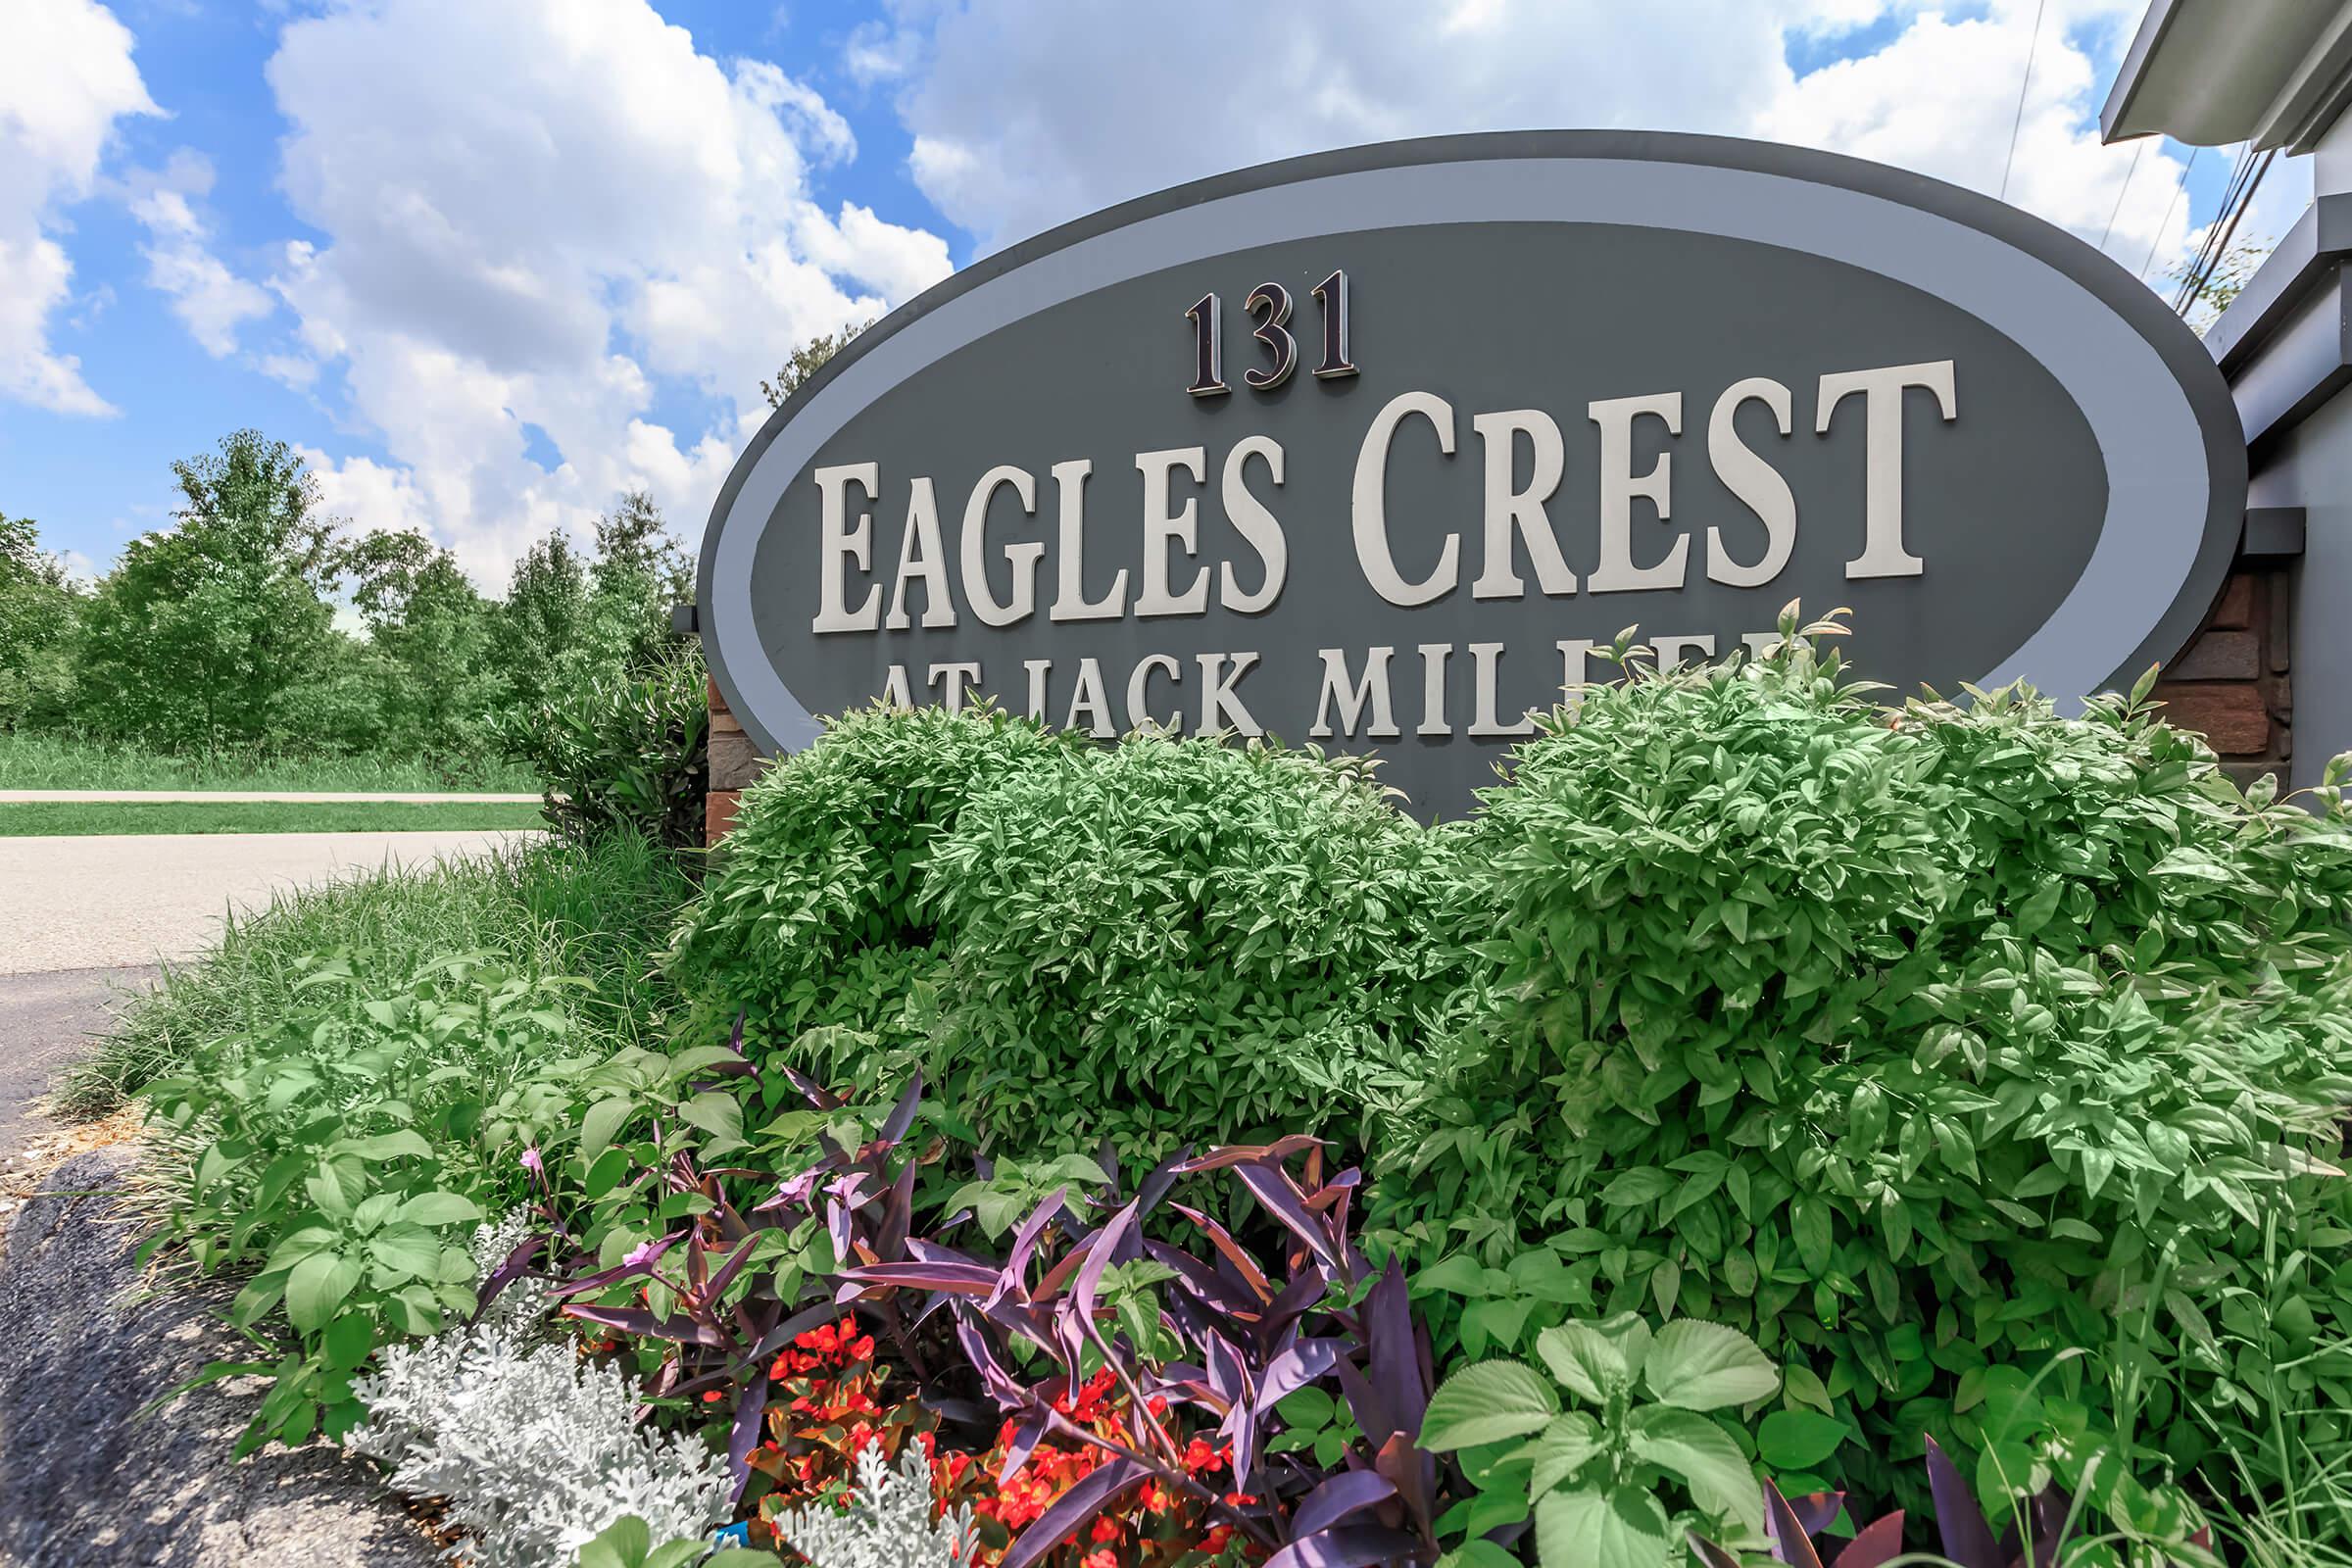 We can't wait to see you at Eagles Crest at Jack Miller in Clarksville, Tennessee